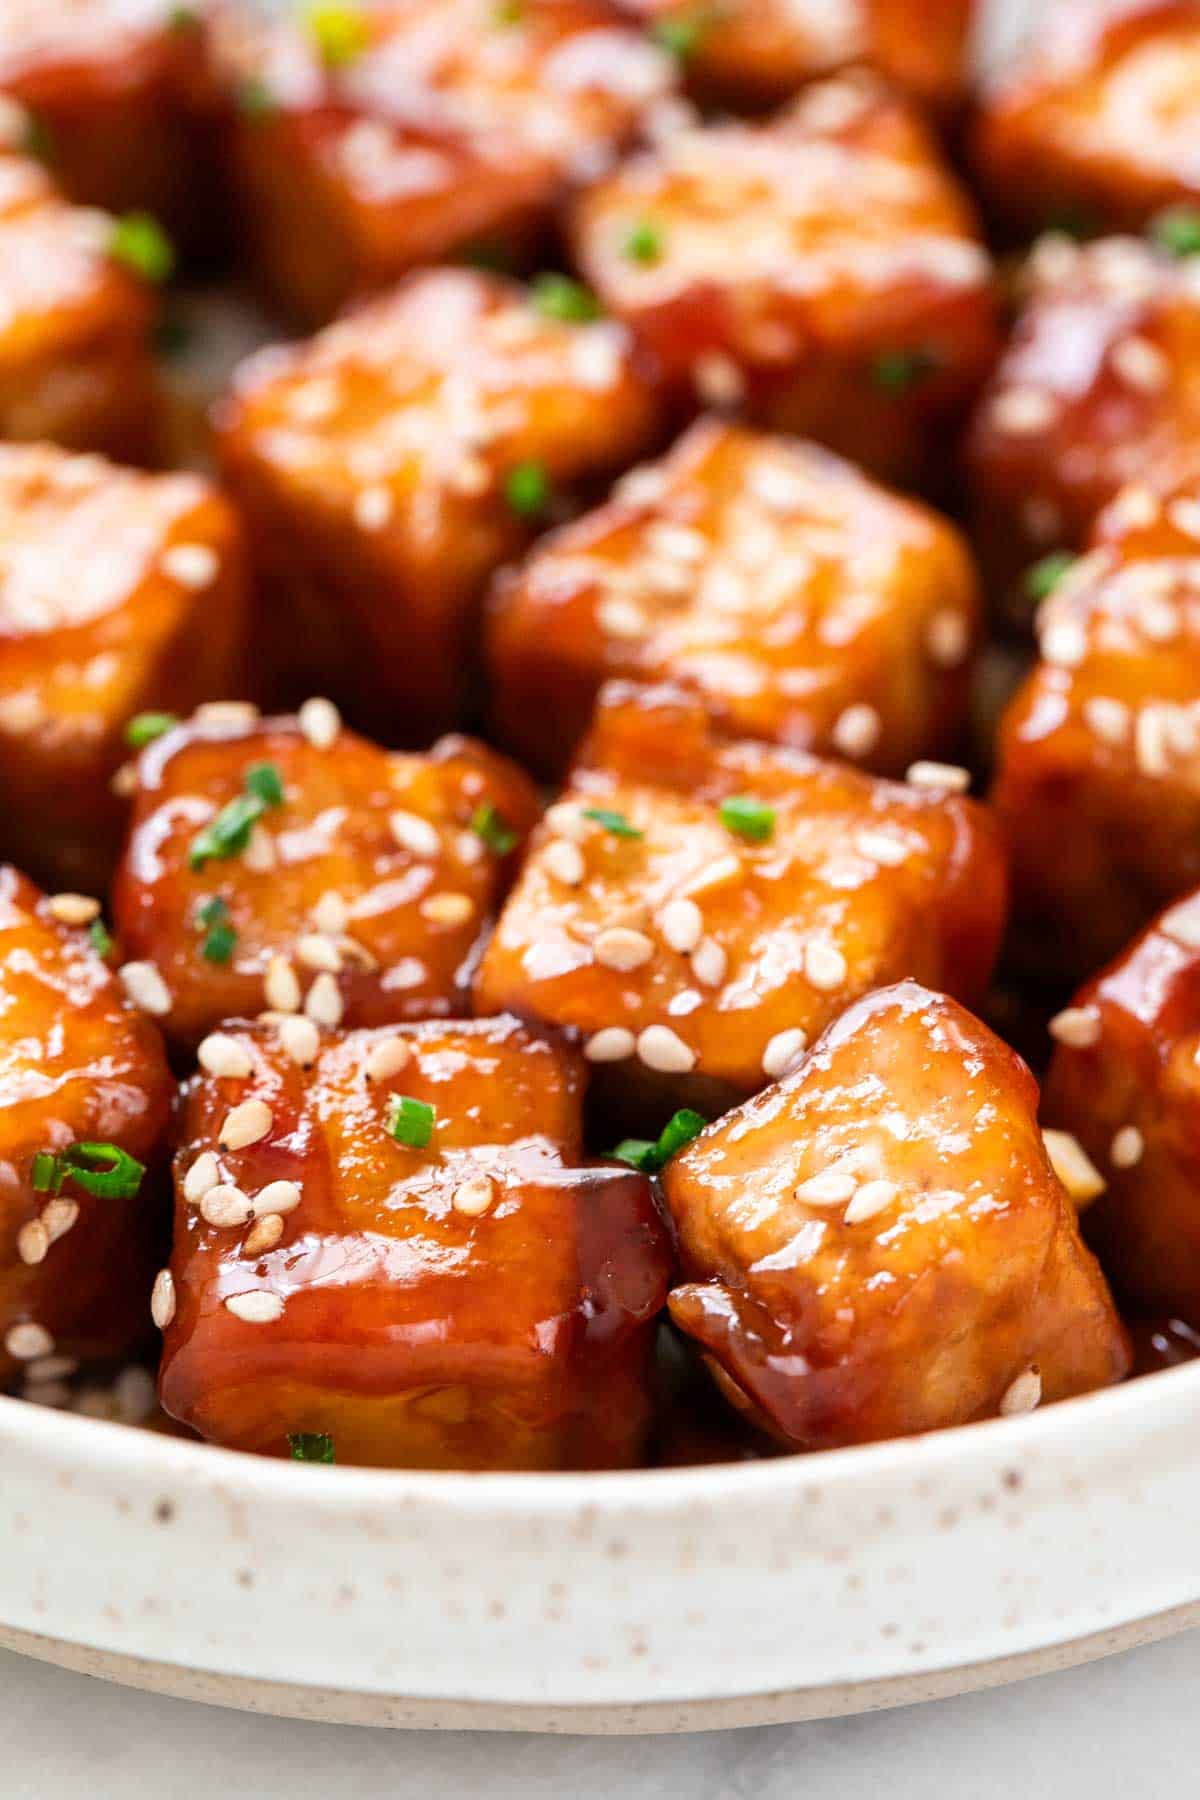 Sesame tofu cubes garnished with sesame seeds and chives.